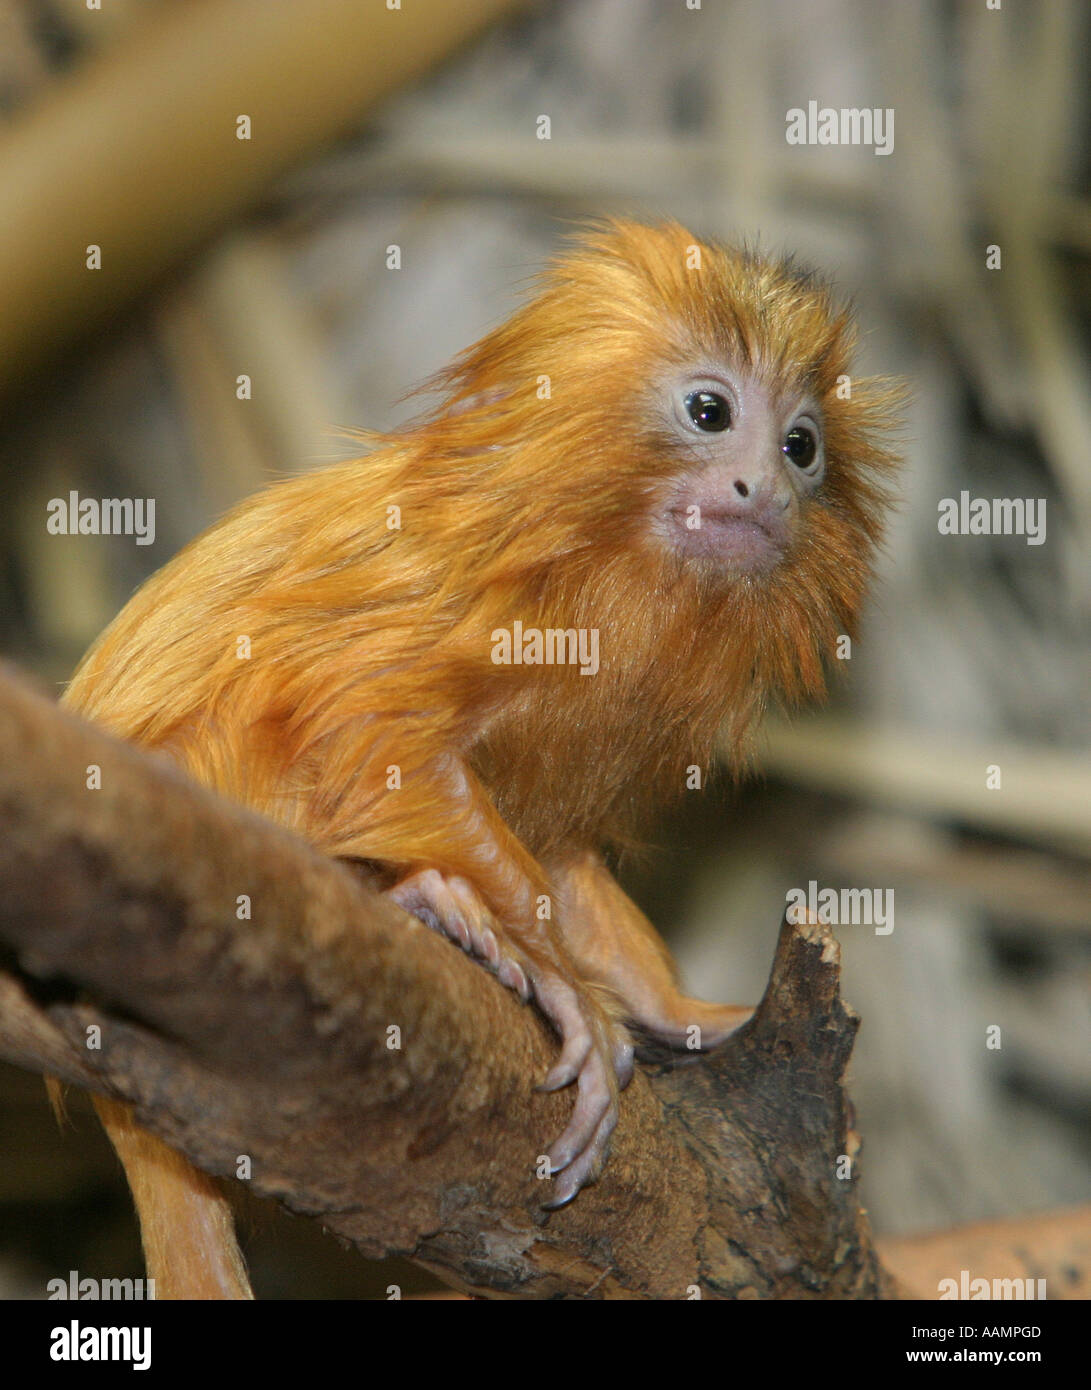 A young golden lion tamarin (leontopithecus rosalia), 18 days old, sitting on a branch Stock Photo